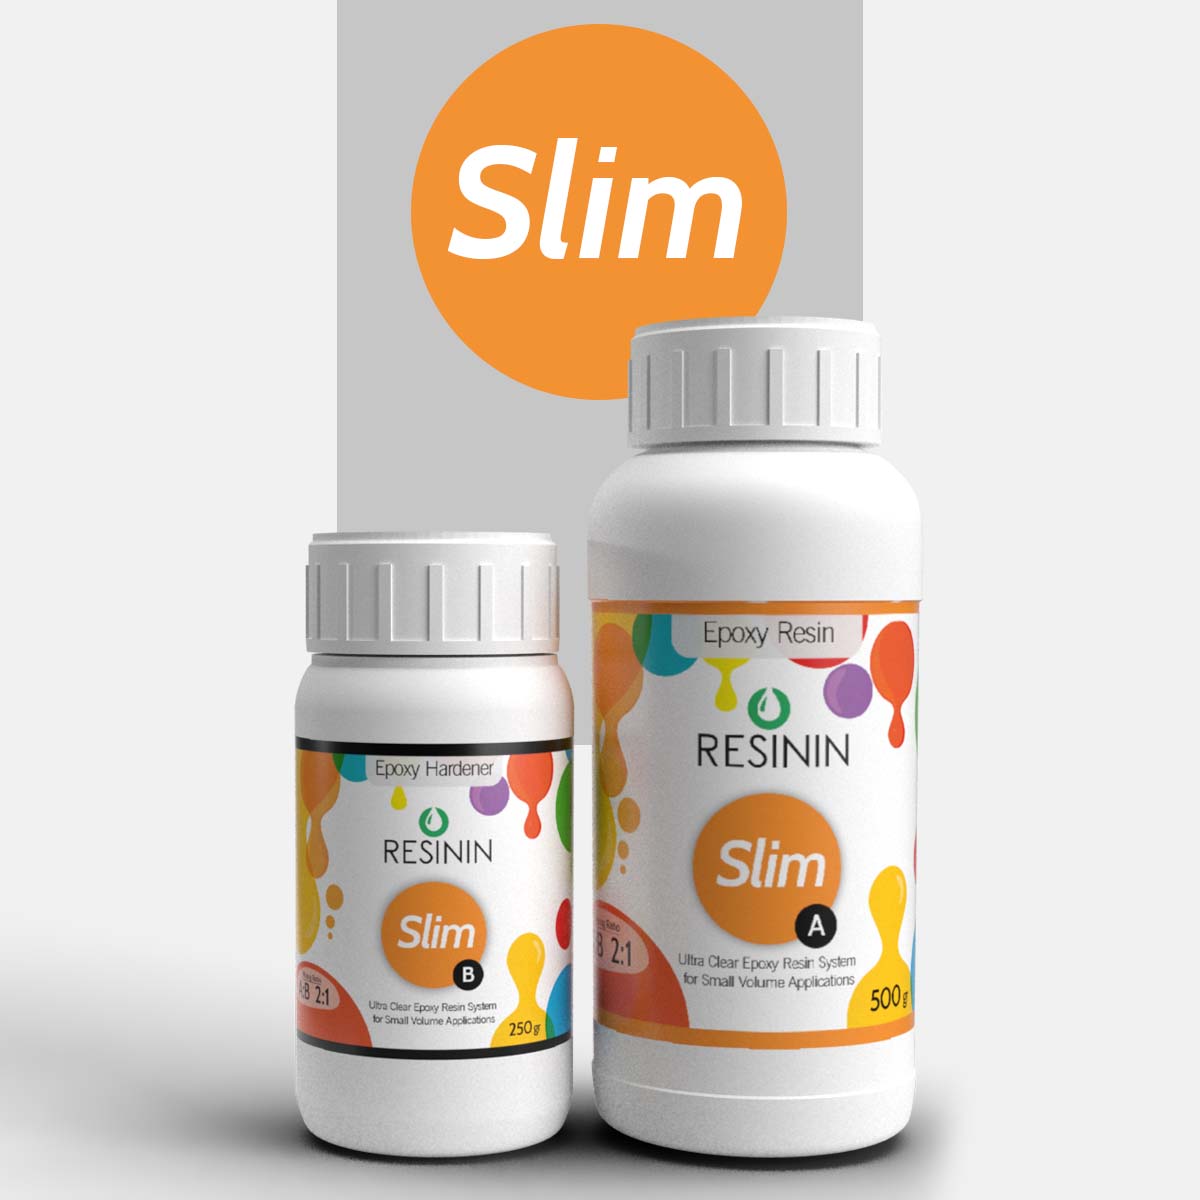 Slim Ultra Clear Epoxy Resin for Small Volume Applications - Resinin